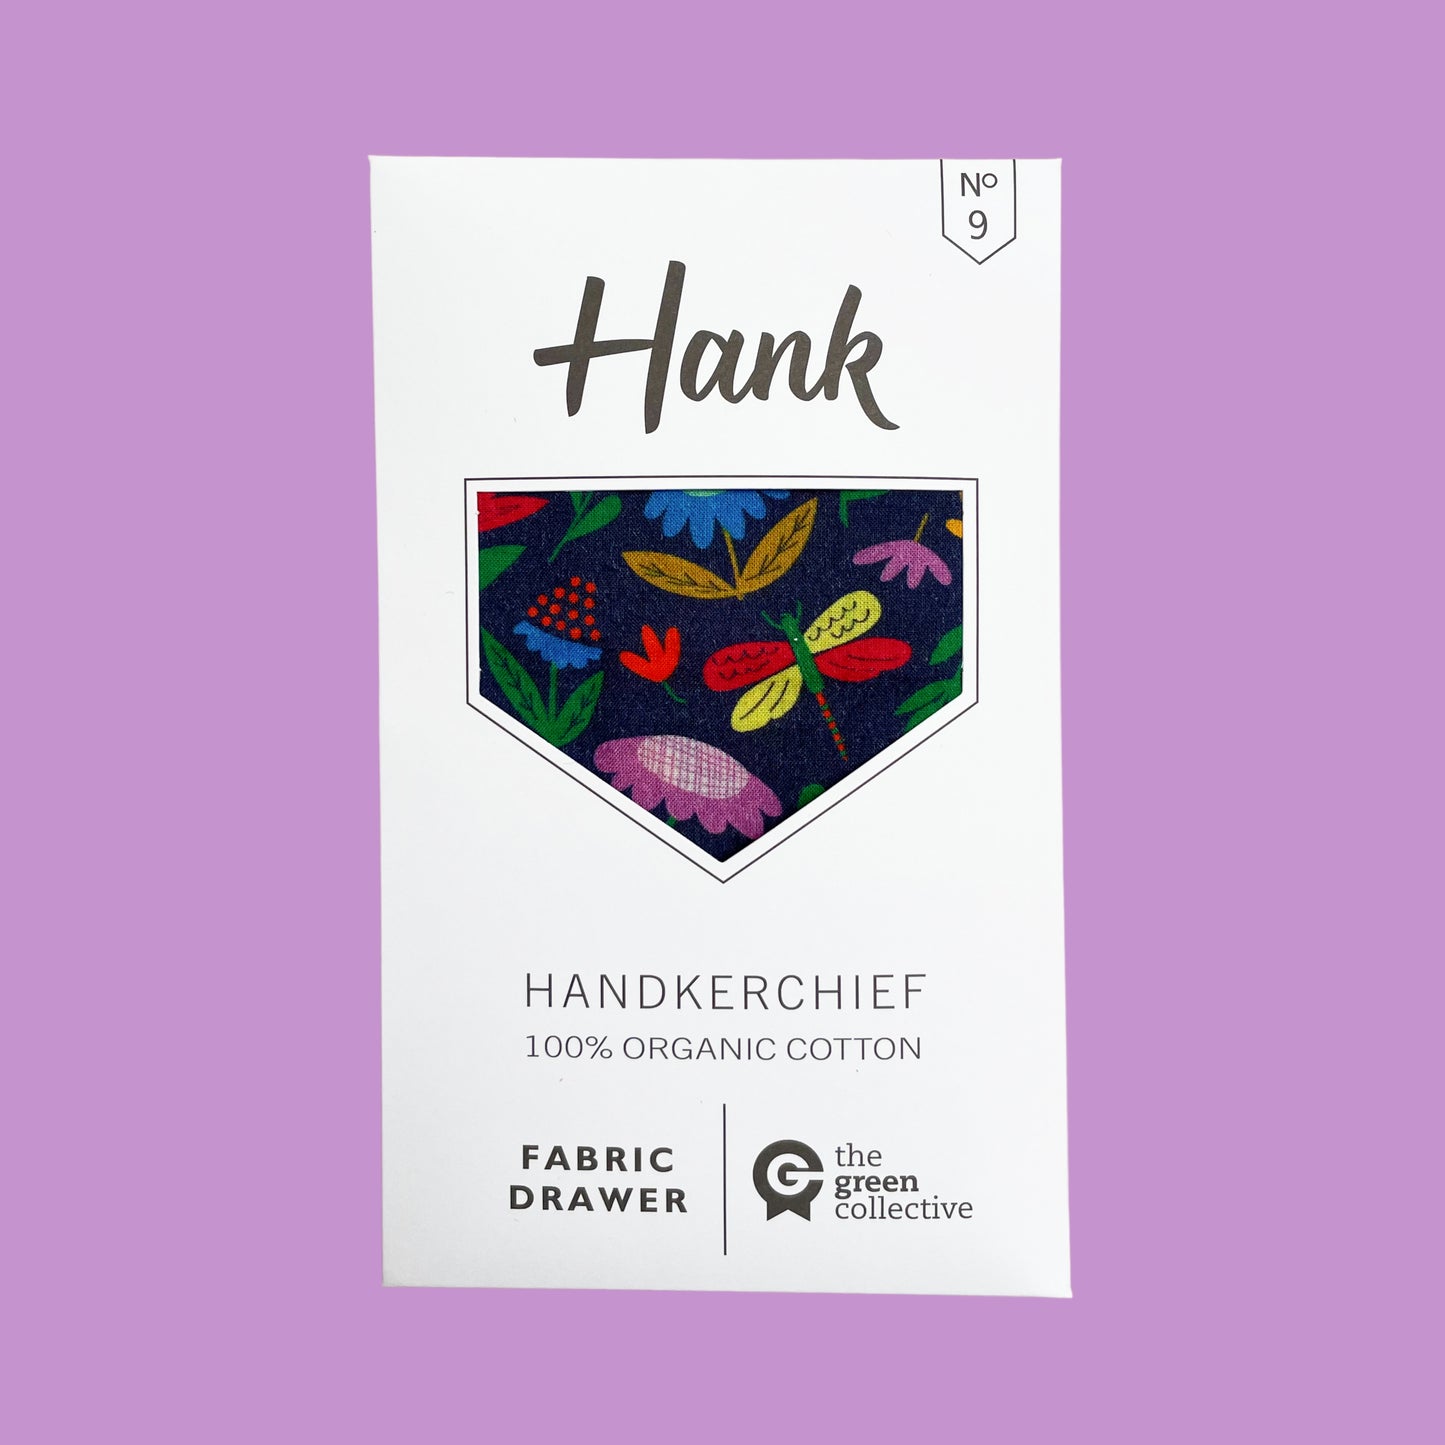 HANK - 9. MEADOW by Beck of Fabric Drawer | Organic Cotton Handkerchief